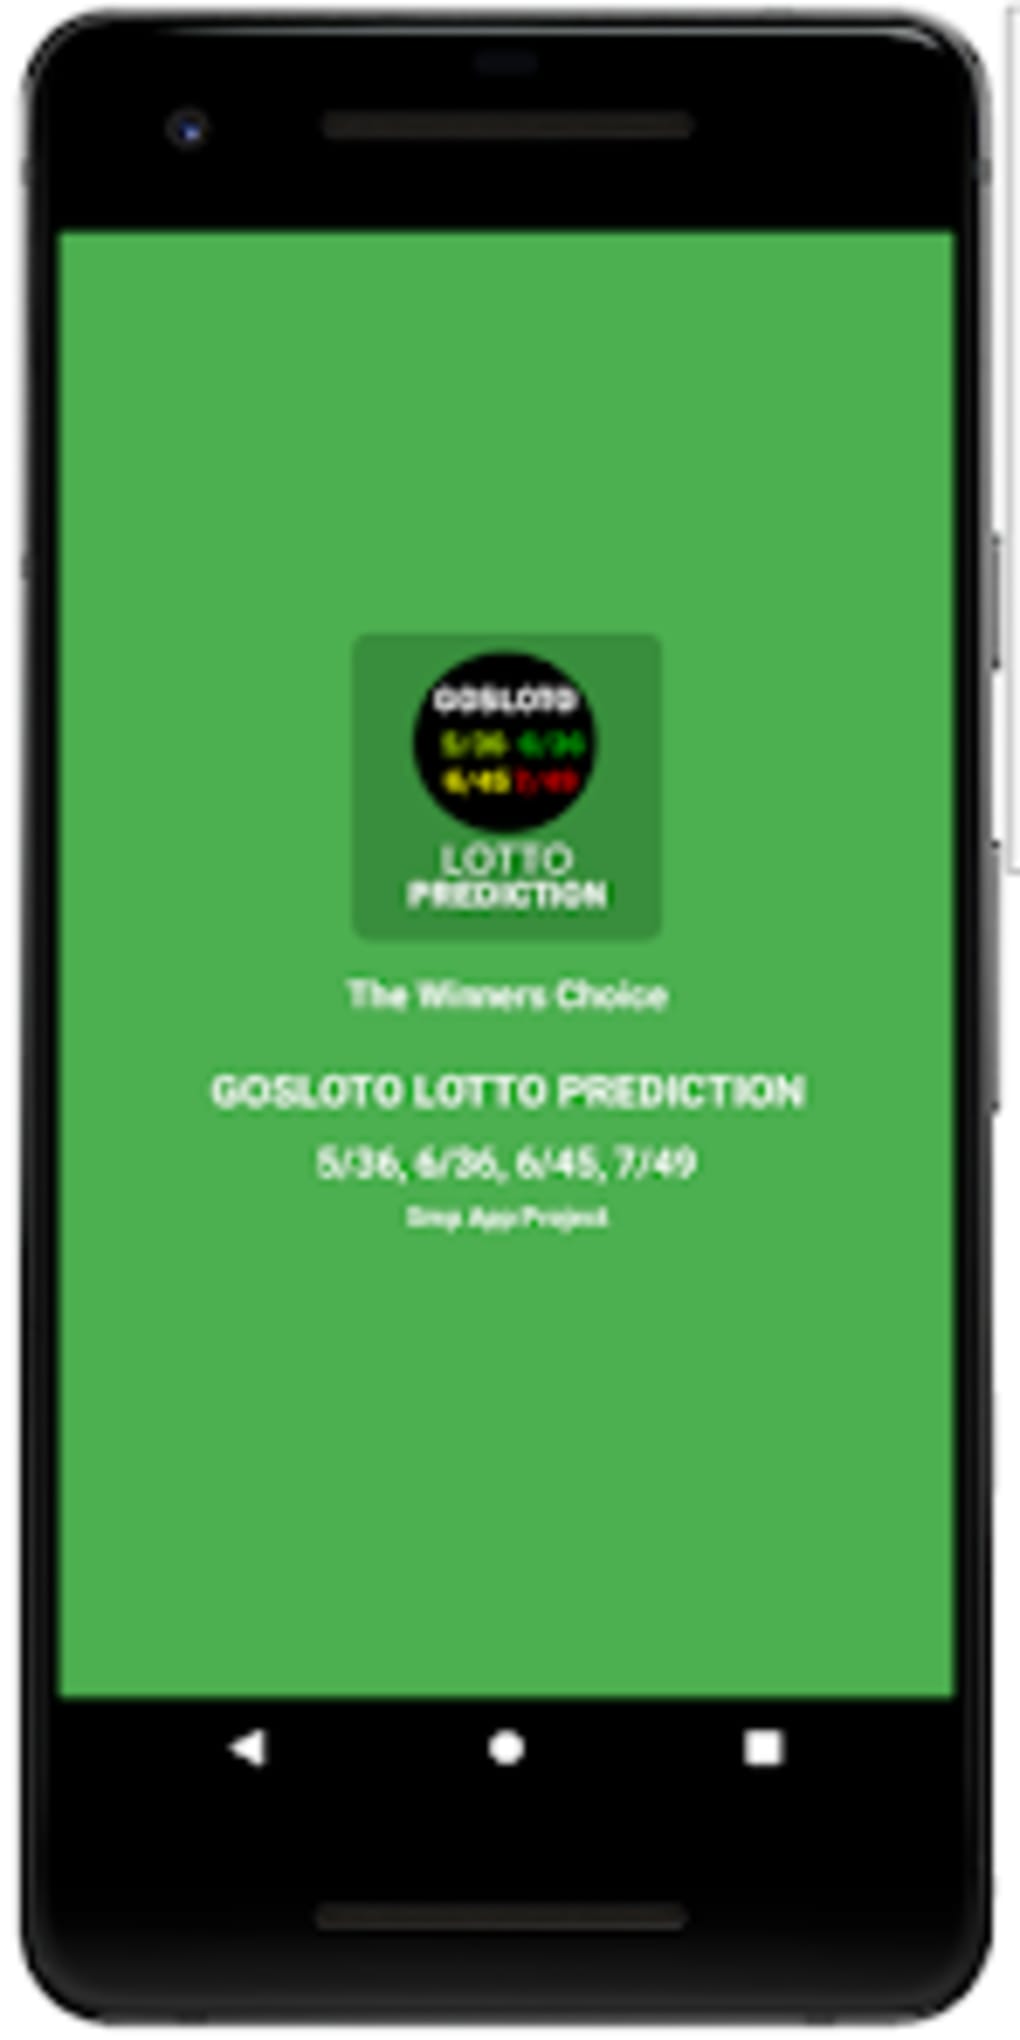 Gosloto Predictions for Android - Download